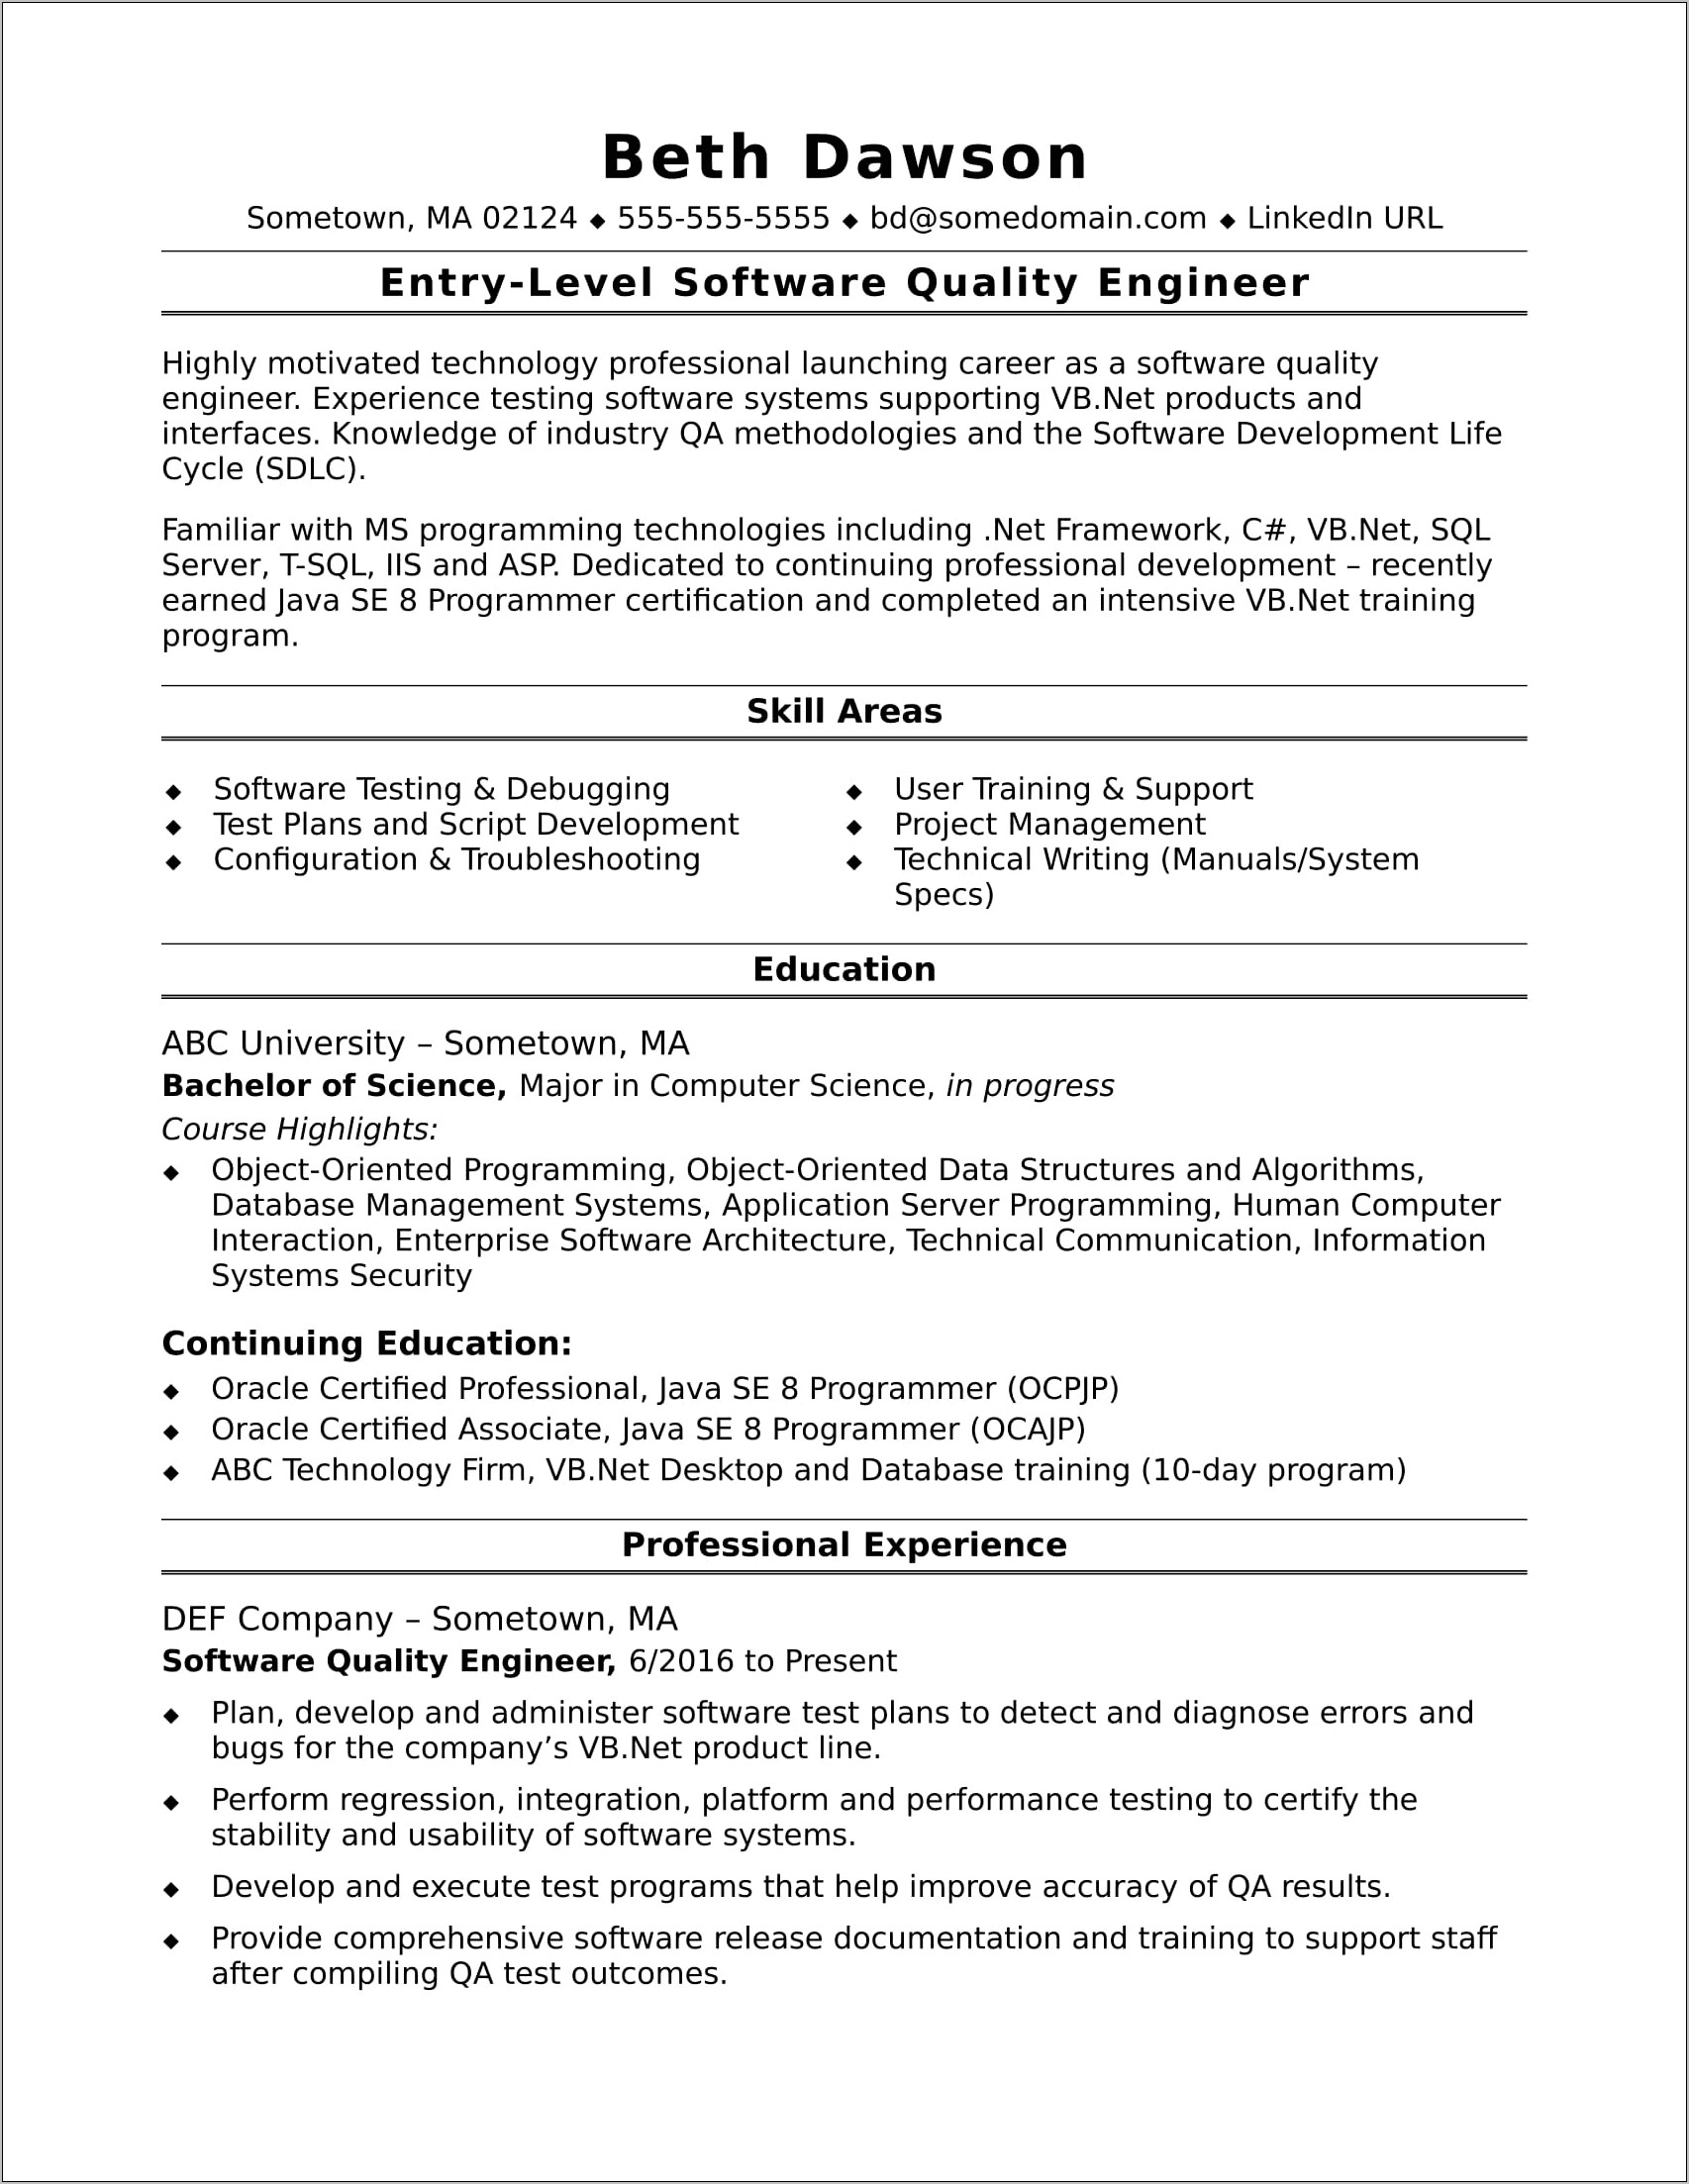 Sample Resume Format For Experienced Test Engineer